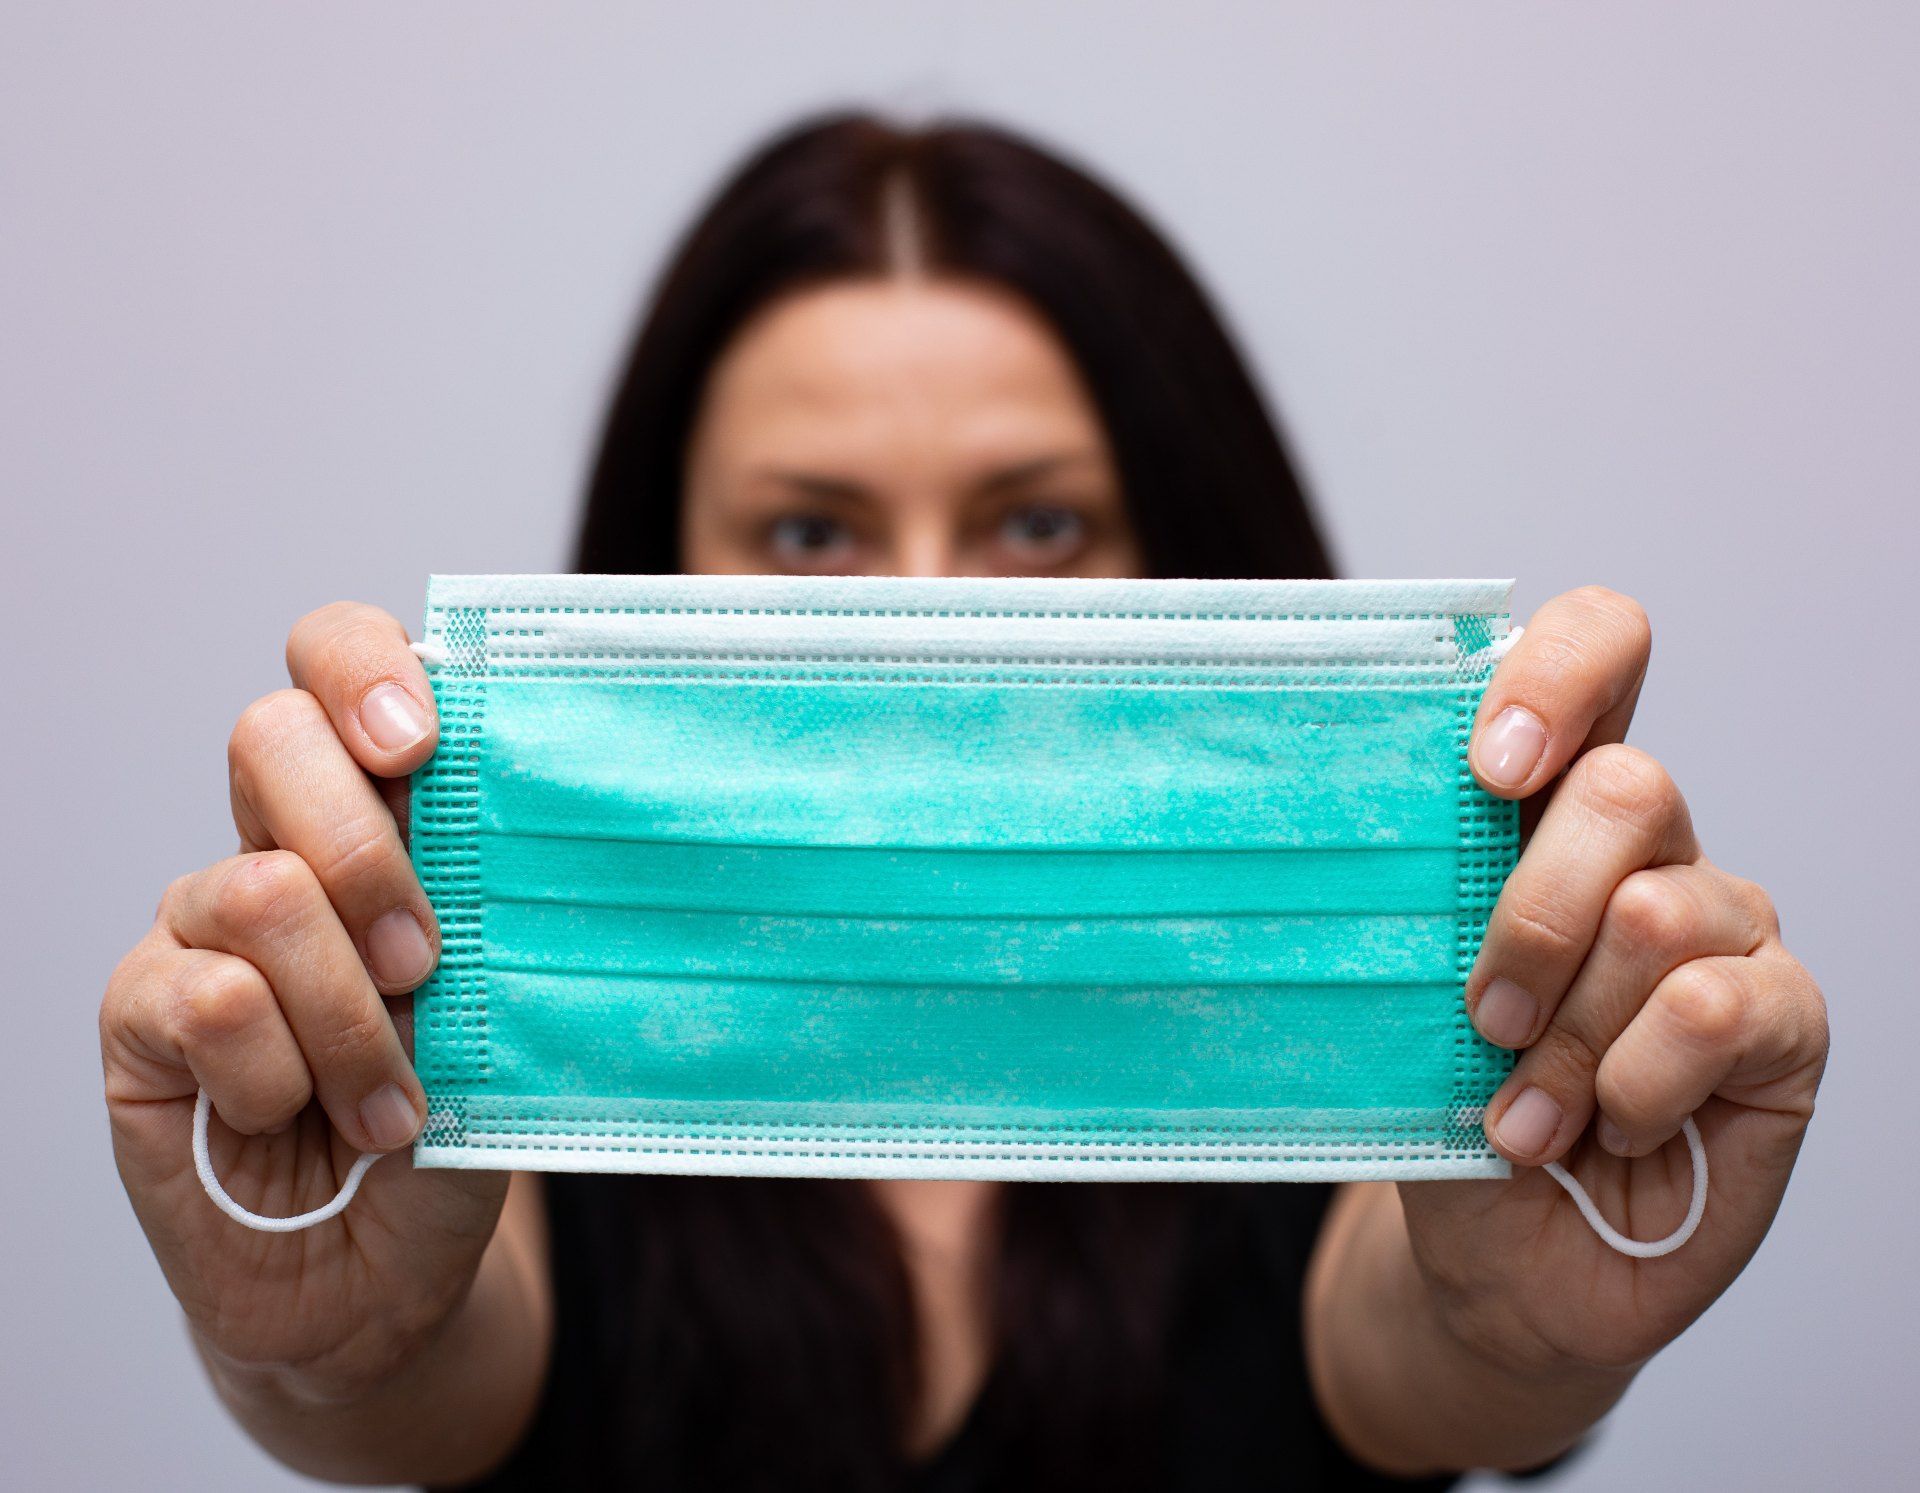 A woman holds out a blue-green surgical mask using both hands - sales tax